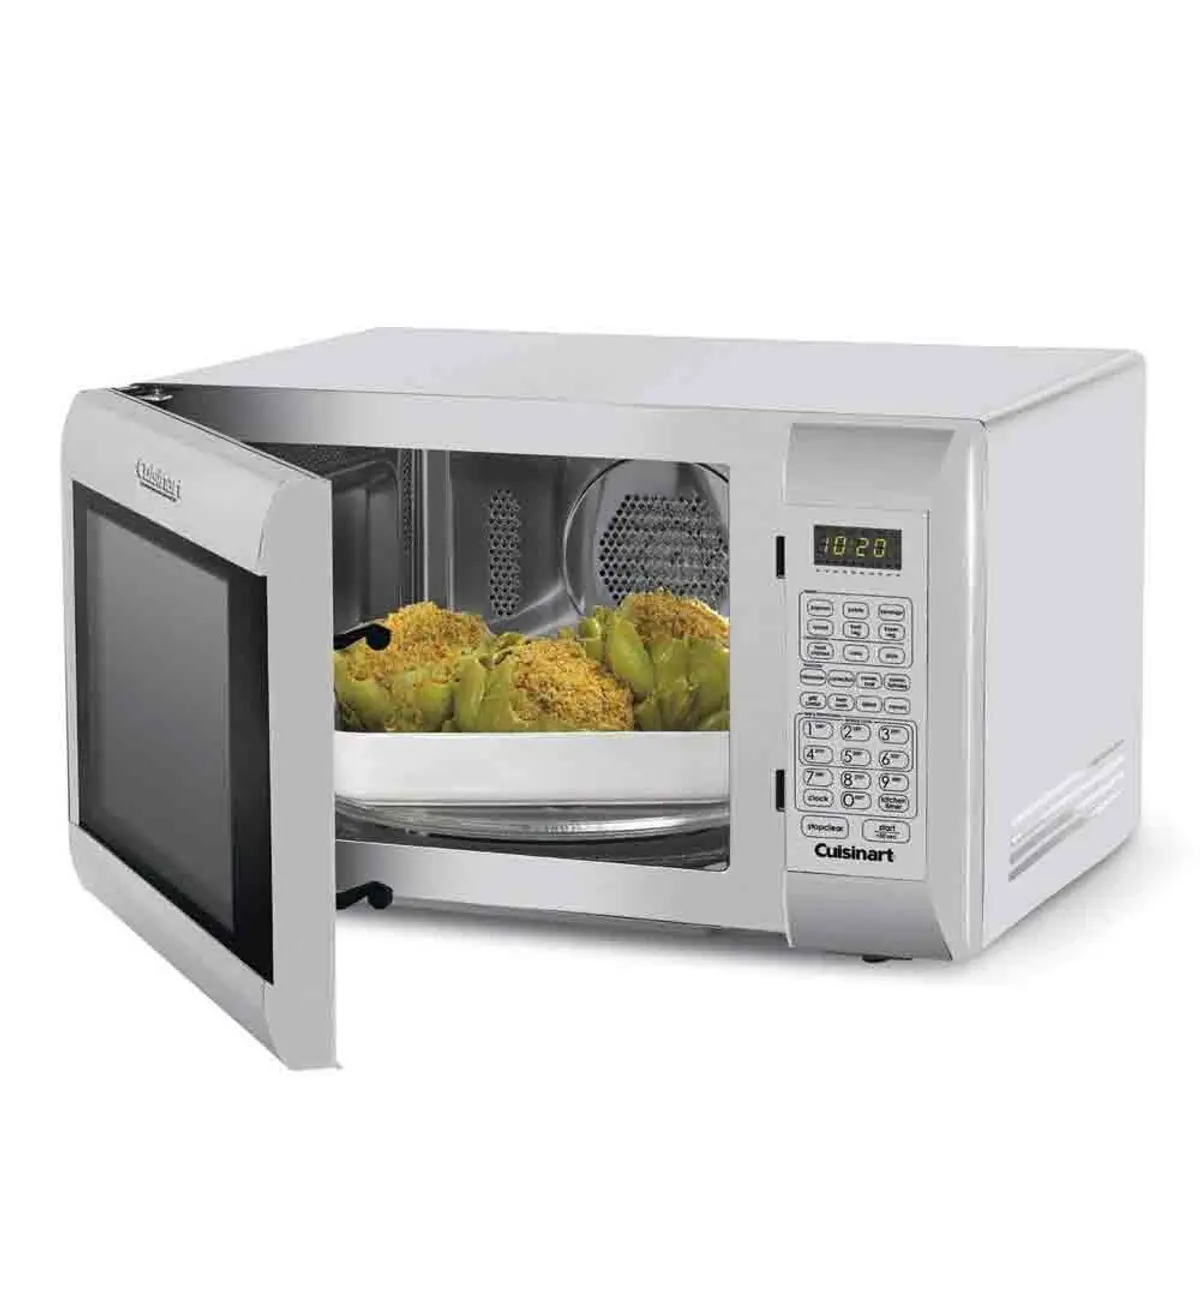 Cuisinart Cubic Foot Convection Microwave Oven Review